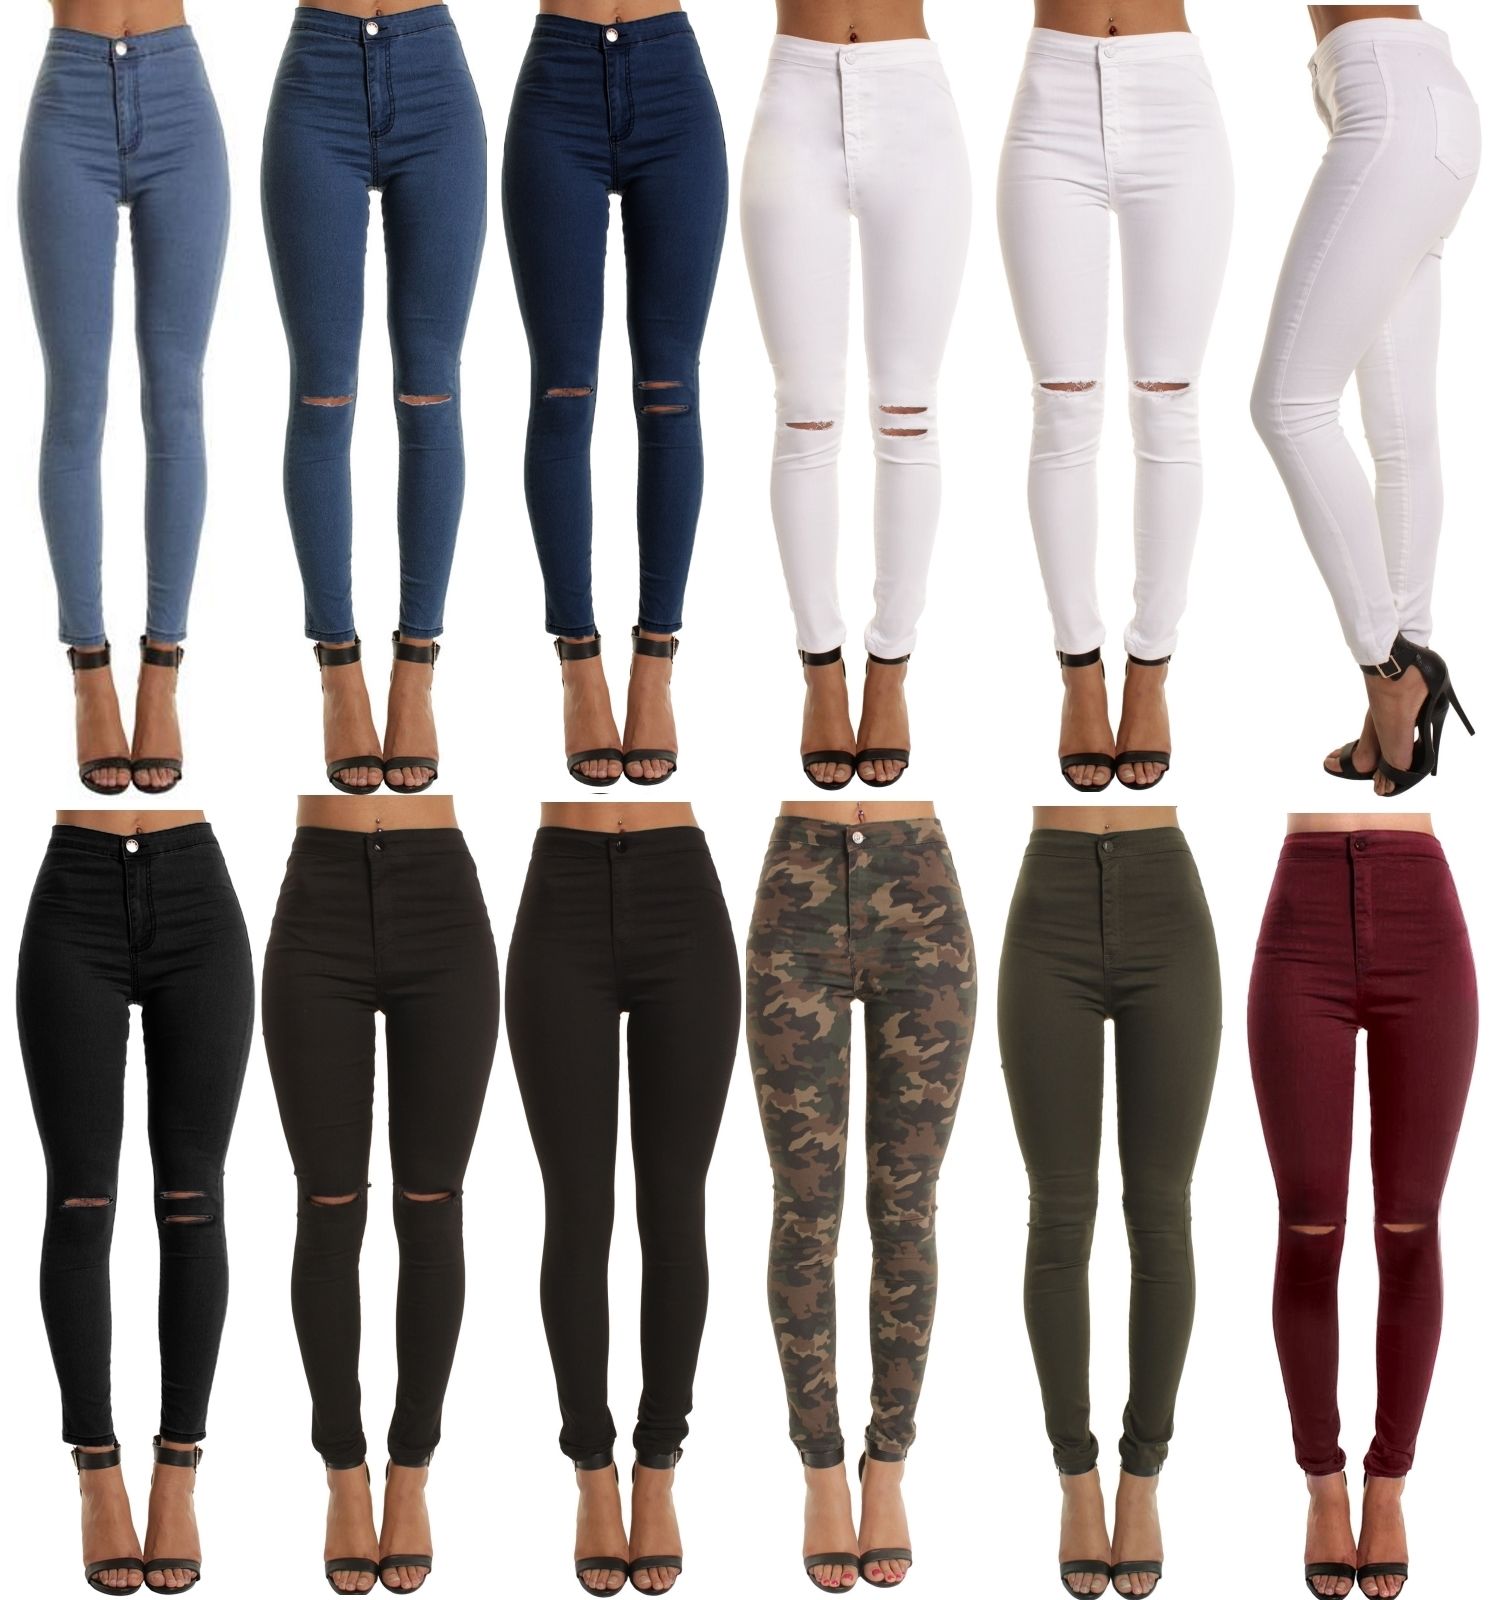 WOMENS HIGH WAISTED STRETCHY SKINNY JEANS LADIES JEGGINGS PANTs 8 10 12 14 16 18